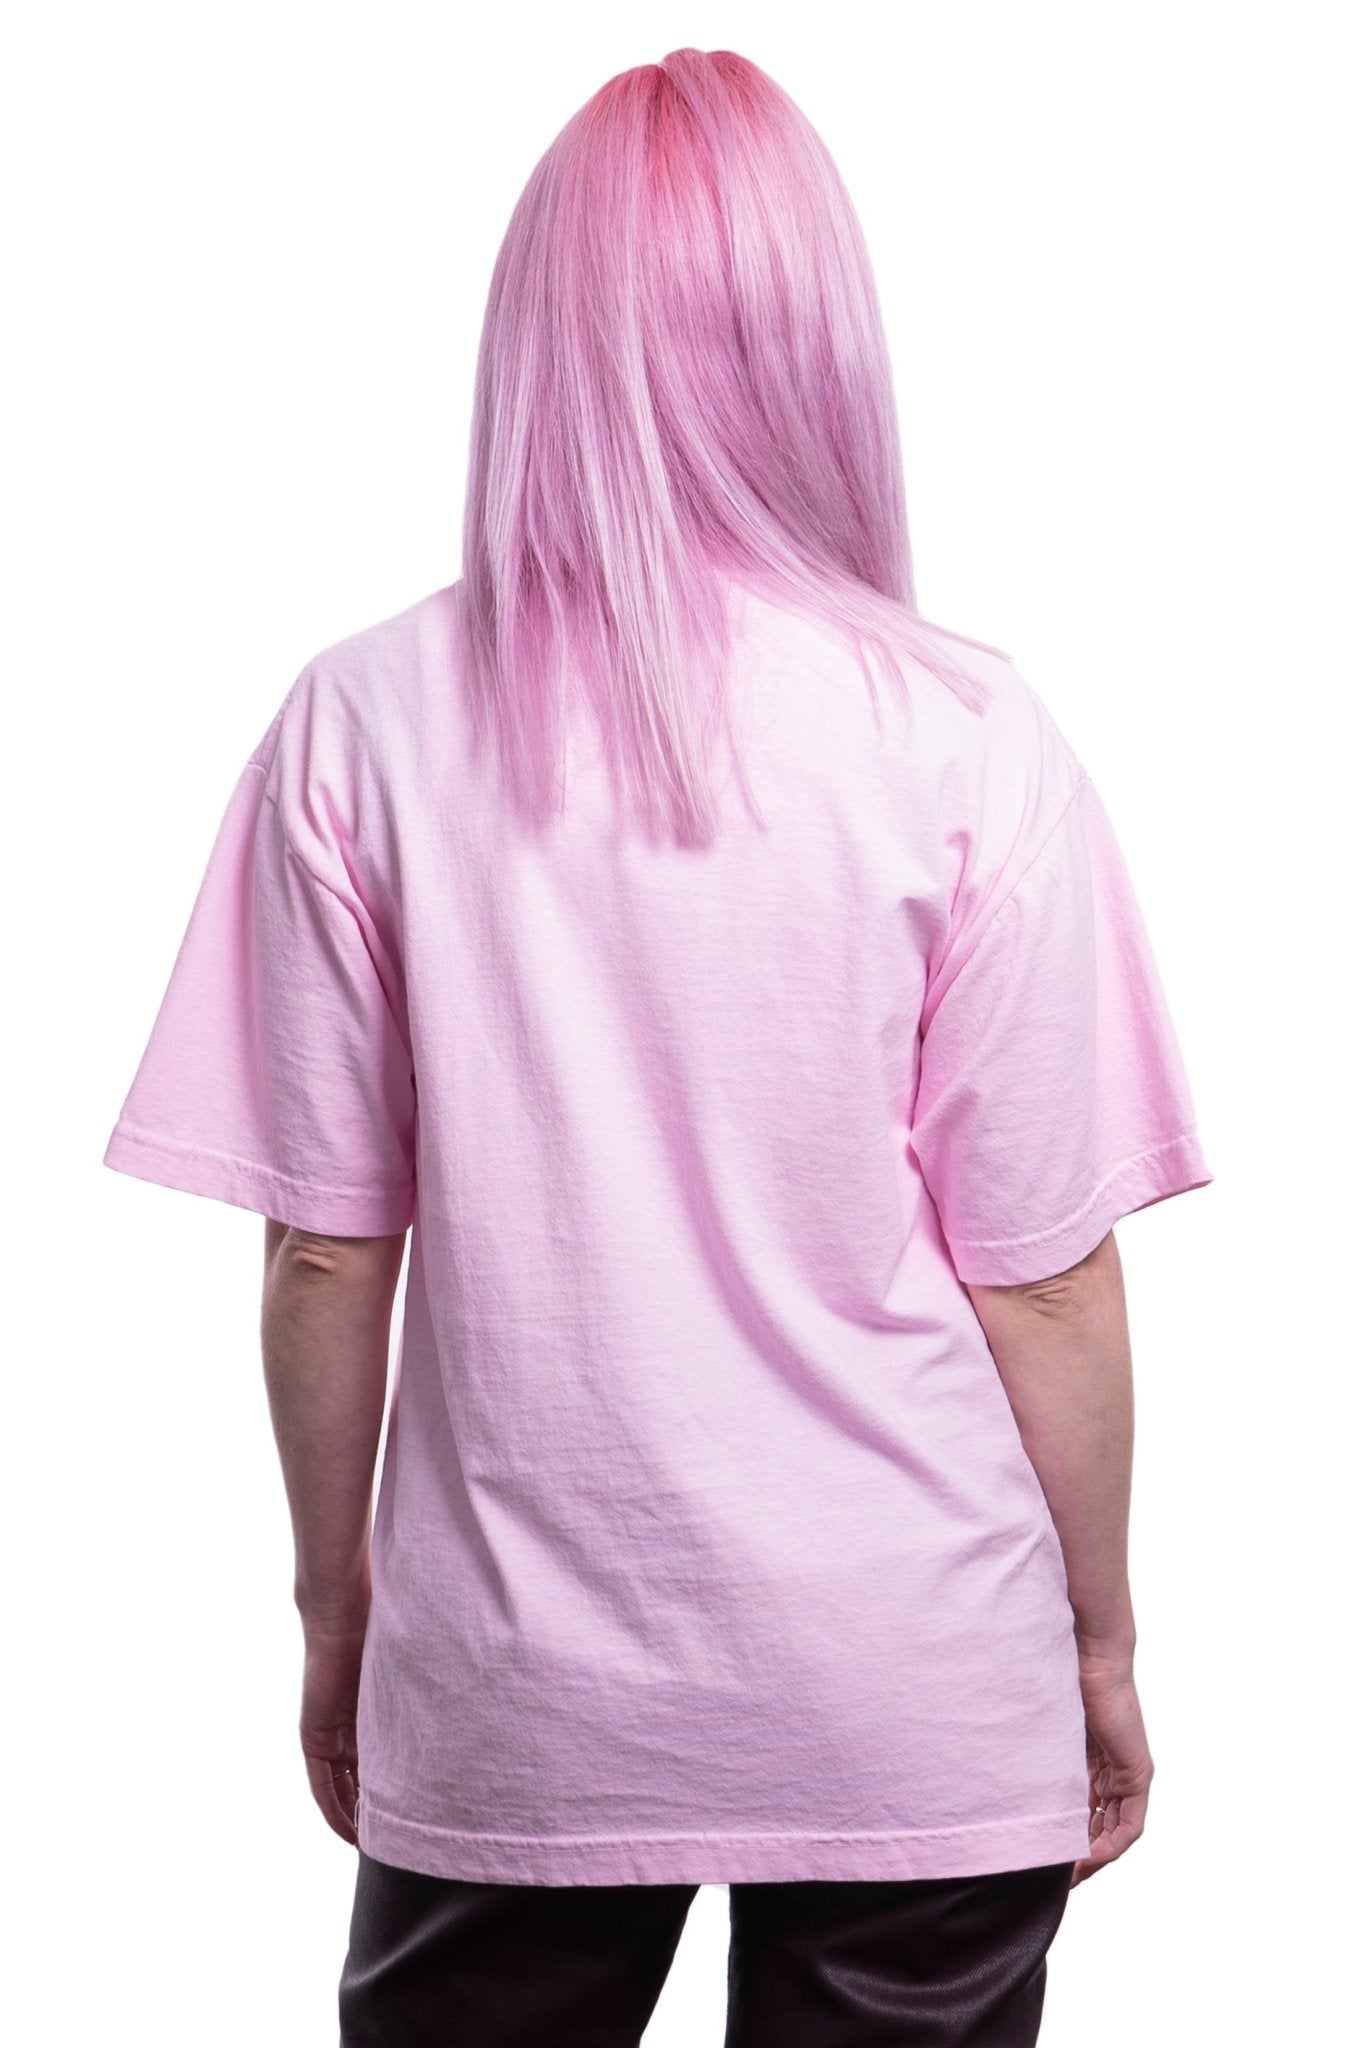 death's dynamic shroud - I'll Try Living Like This T-Shirt - Pink - 100% Electronica Official Store (Photo 2)